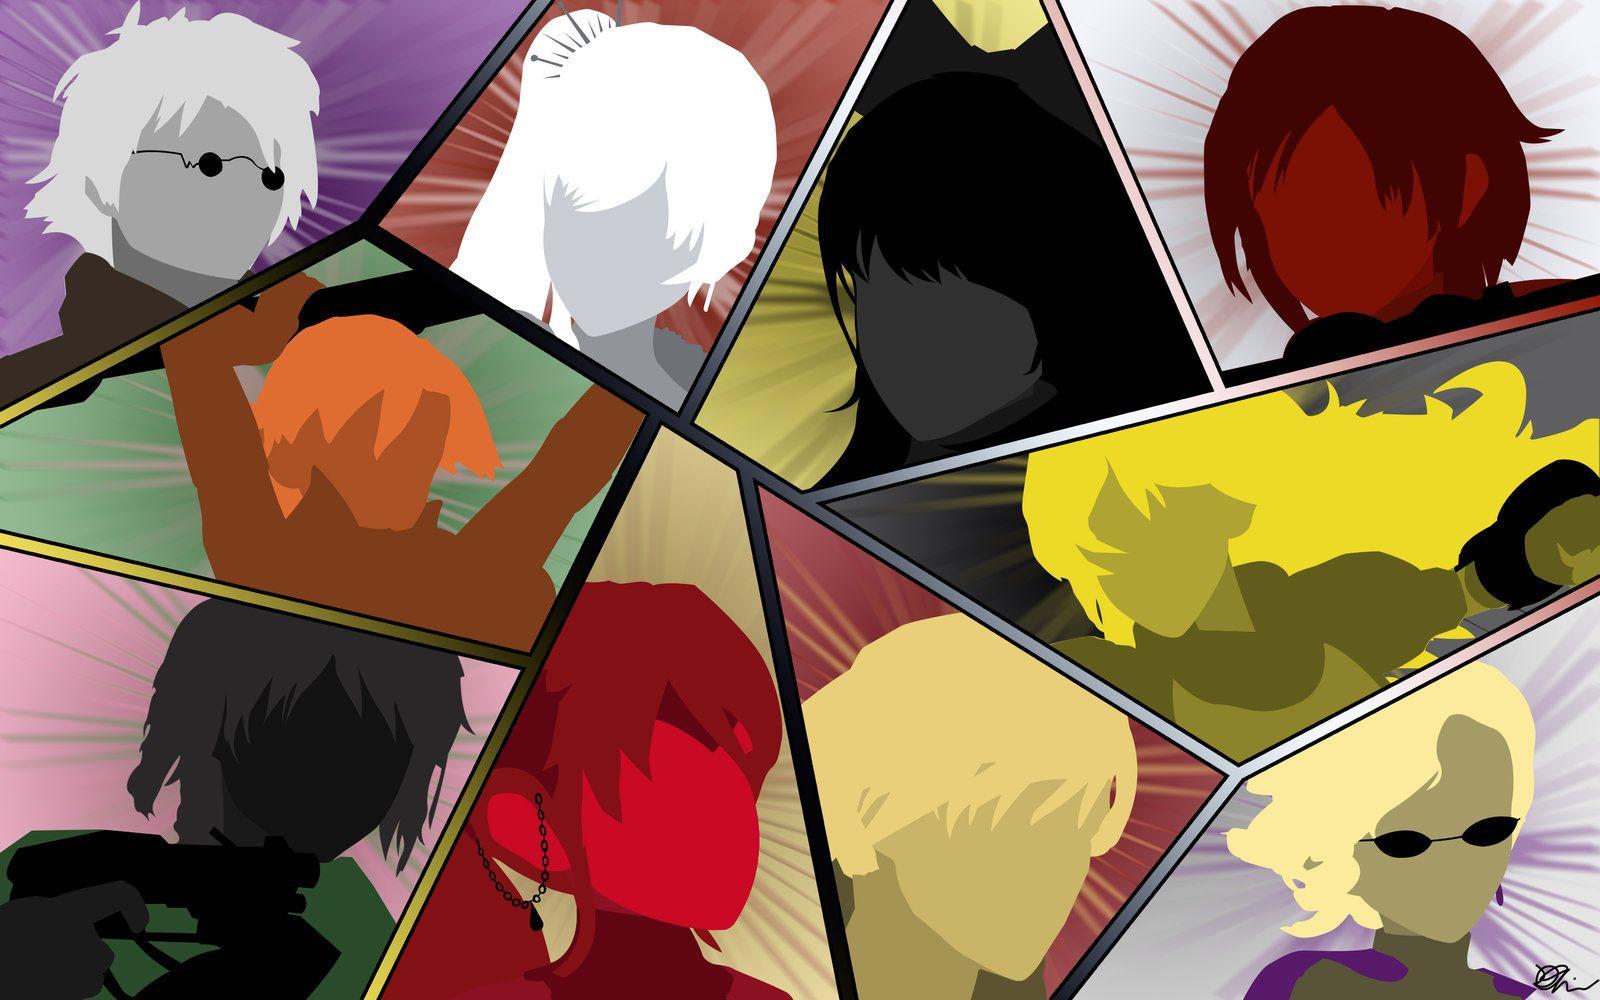 voices of RWBY; scroll down